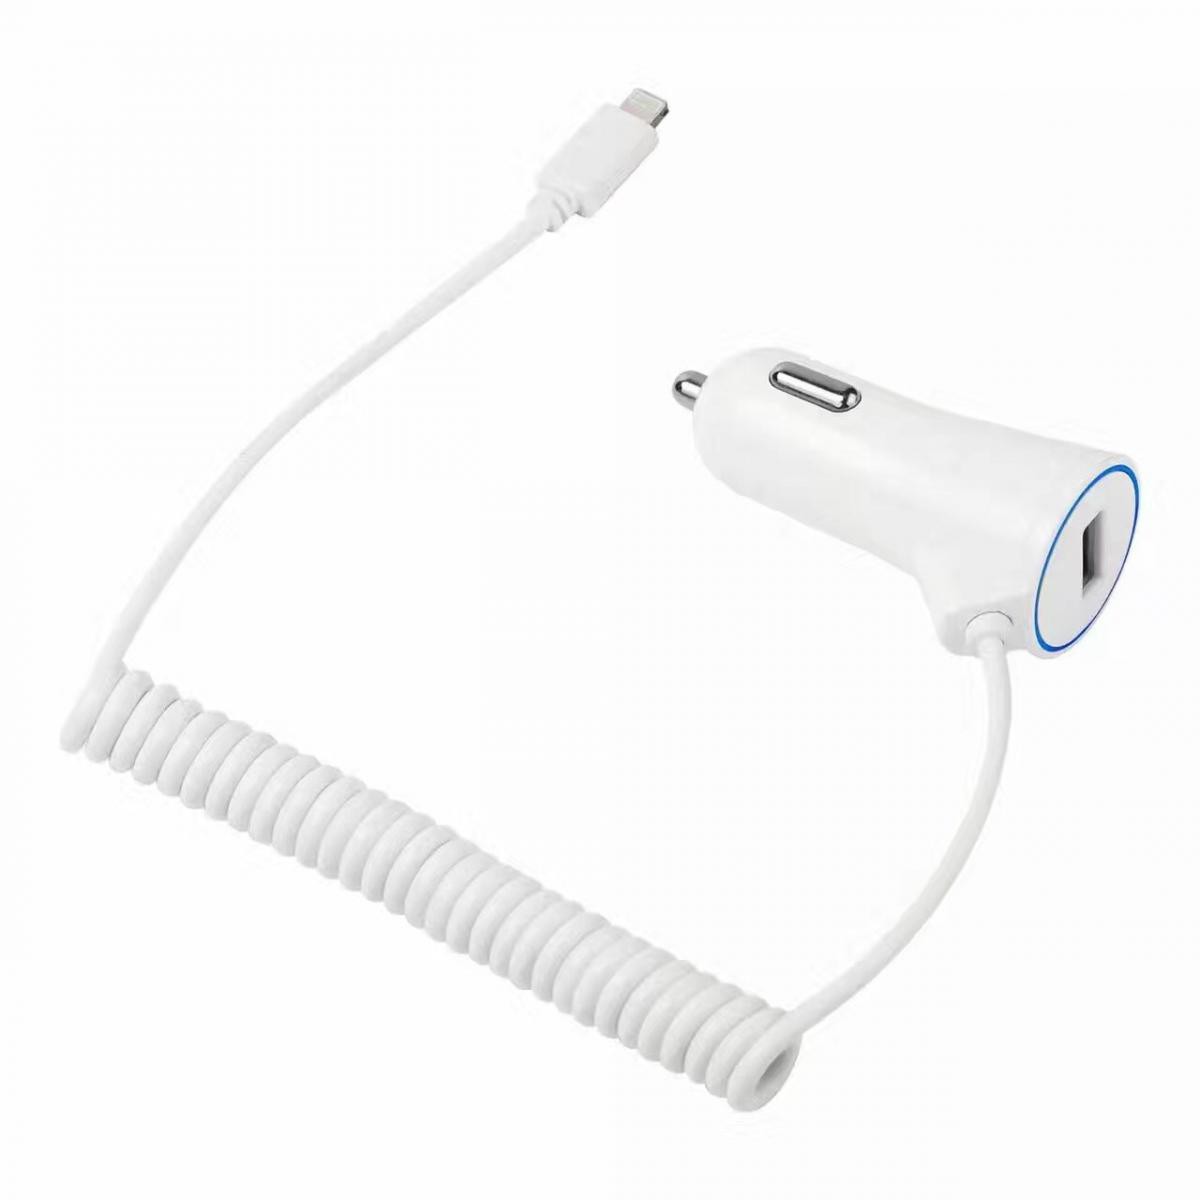 Shot - Cable Chargeur Allume Cigare Lightning pour "IPHONE 12 Pro Max"Port USB Prise Voiture (BLANC) - Chargeur Voiture 12V